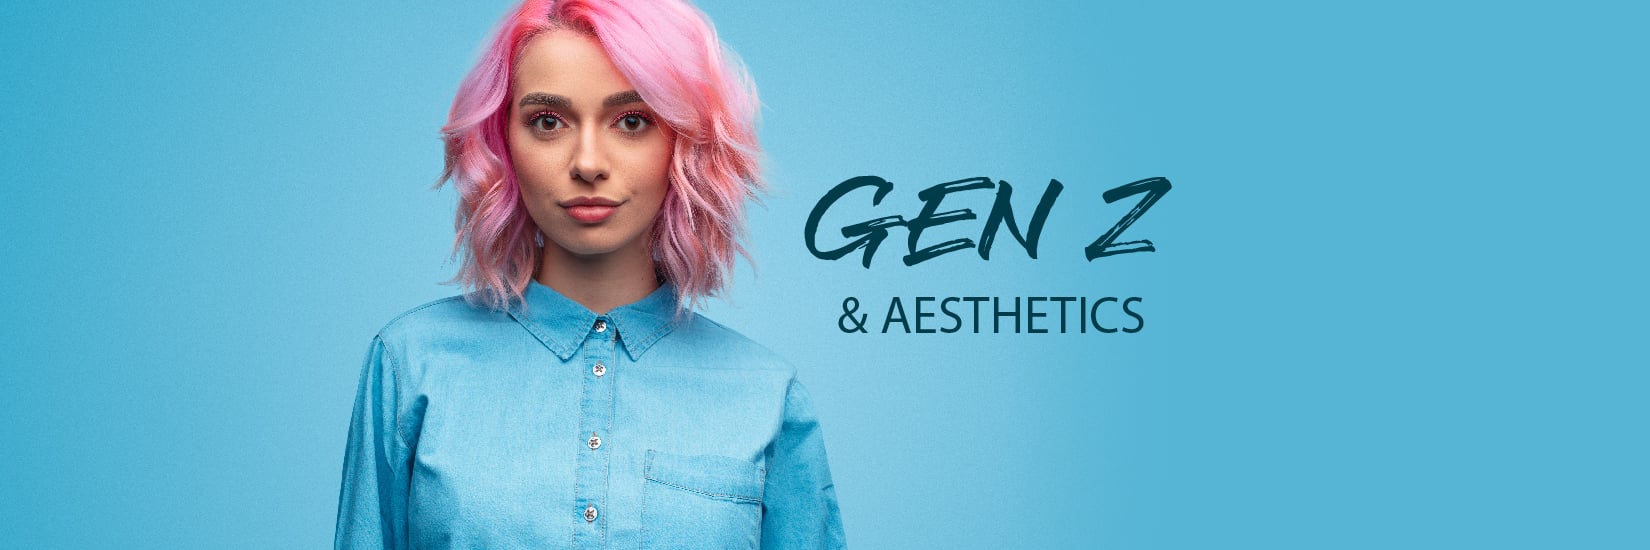 Gen Z’s Aesthetics Obsession and Your Practice